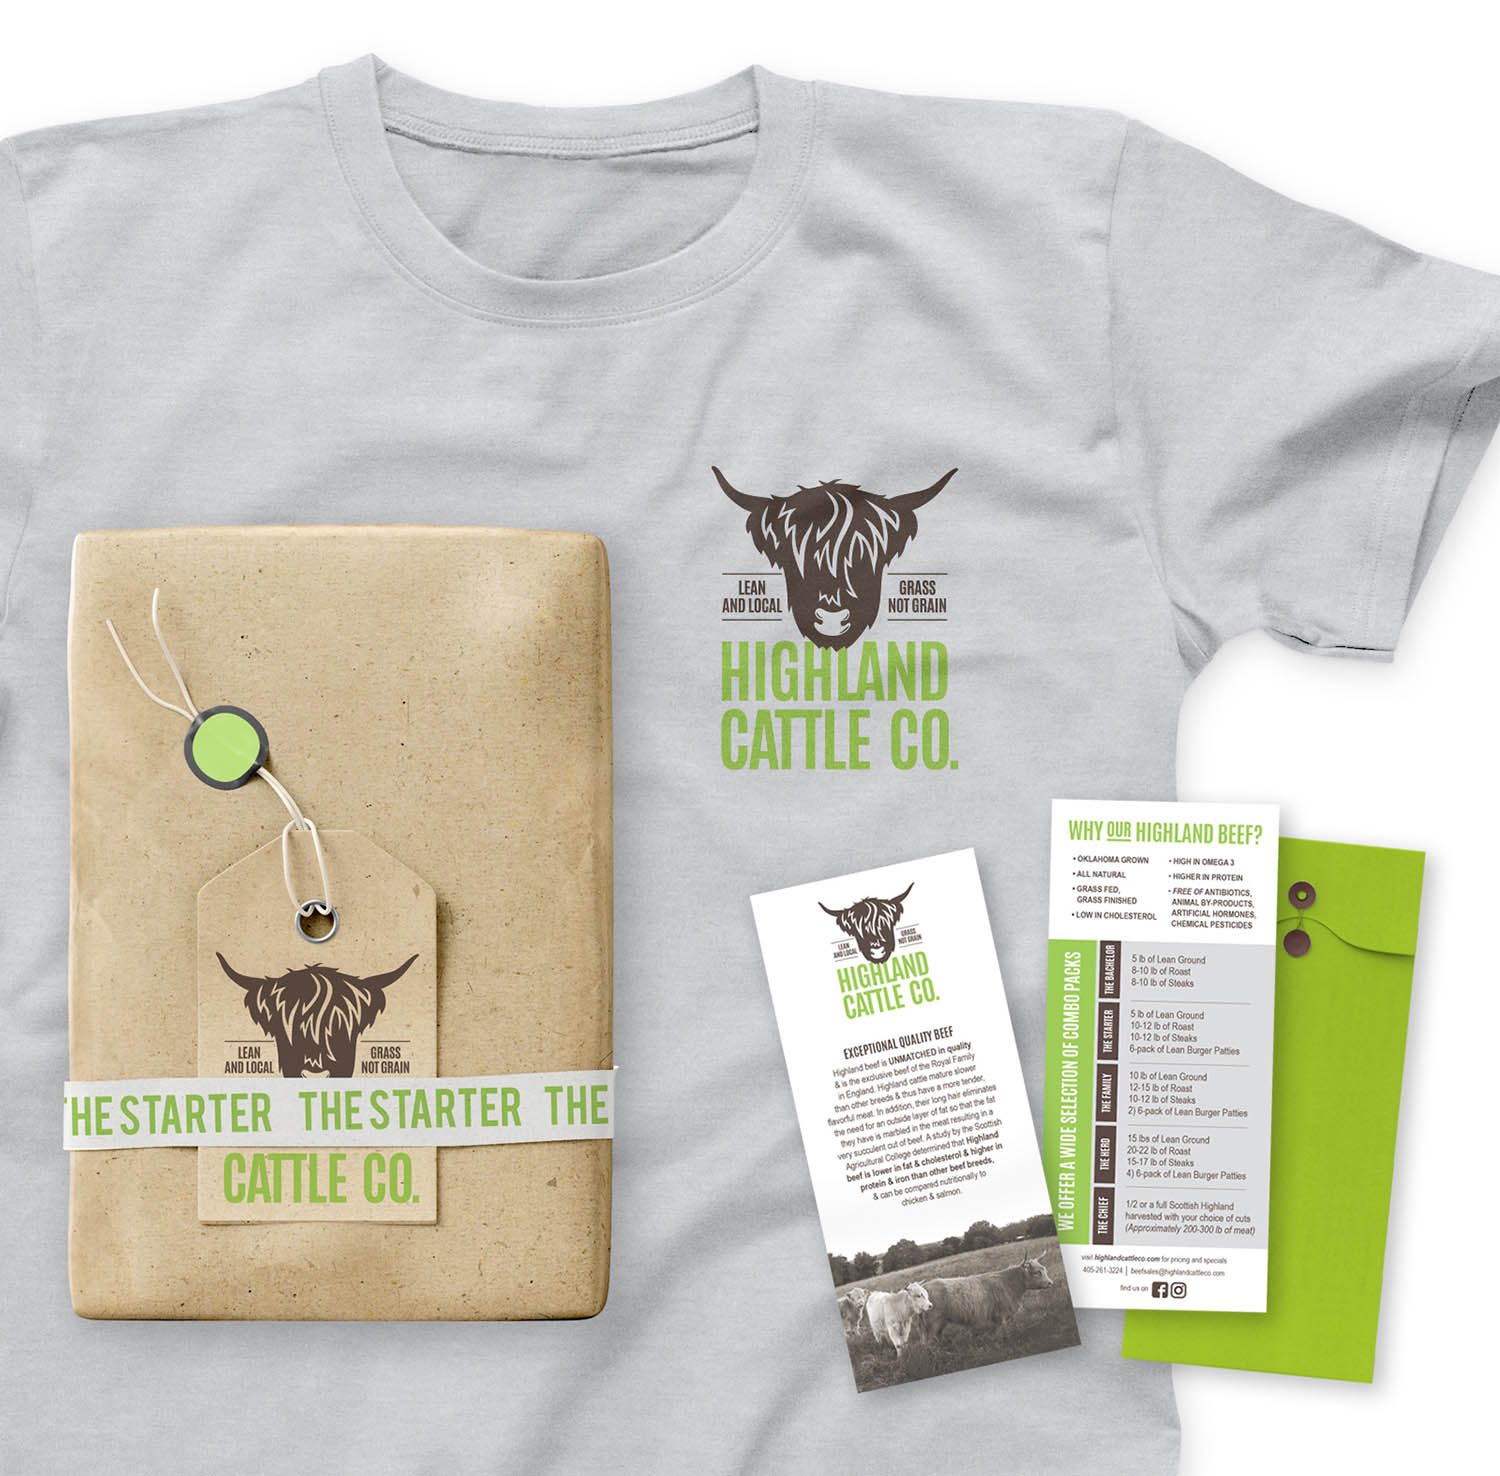 Highland Cattle Co. Collateral